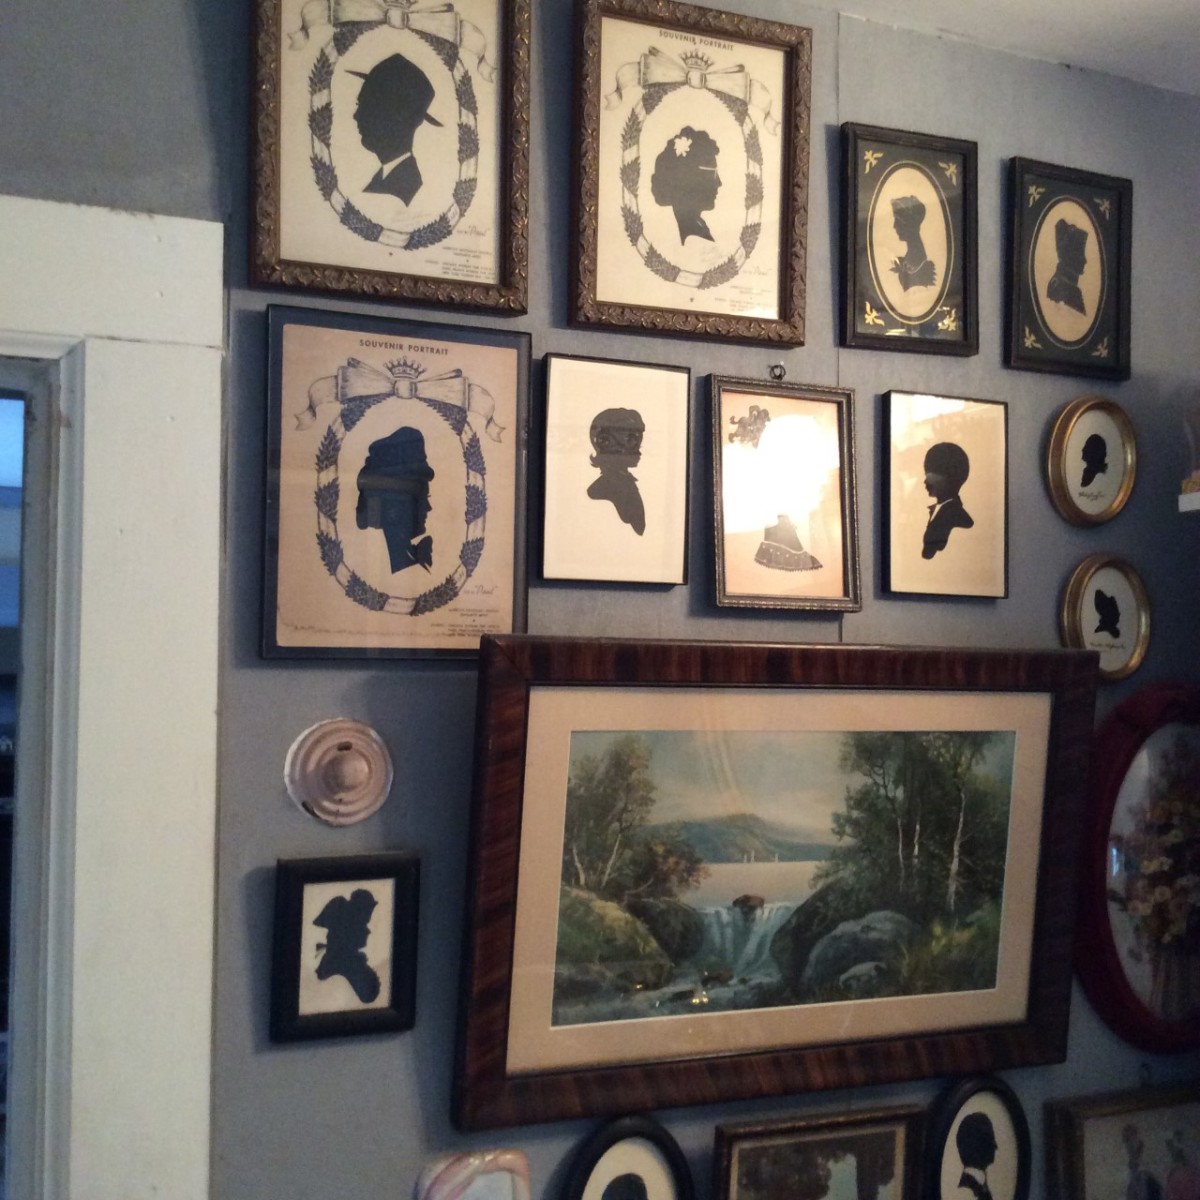 Mullikin said that she loves finding old silhouettes, which are getting hard to find;  the top two to the right she recently found in Old Town Alexandria, where her  daughter lives.